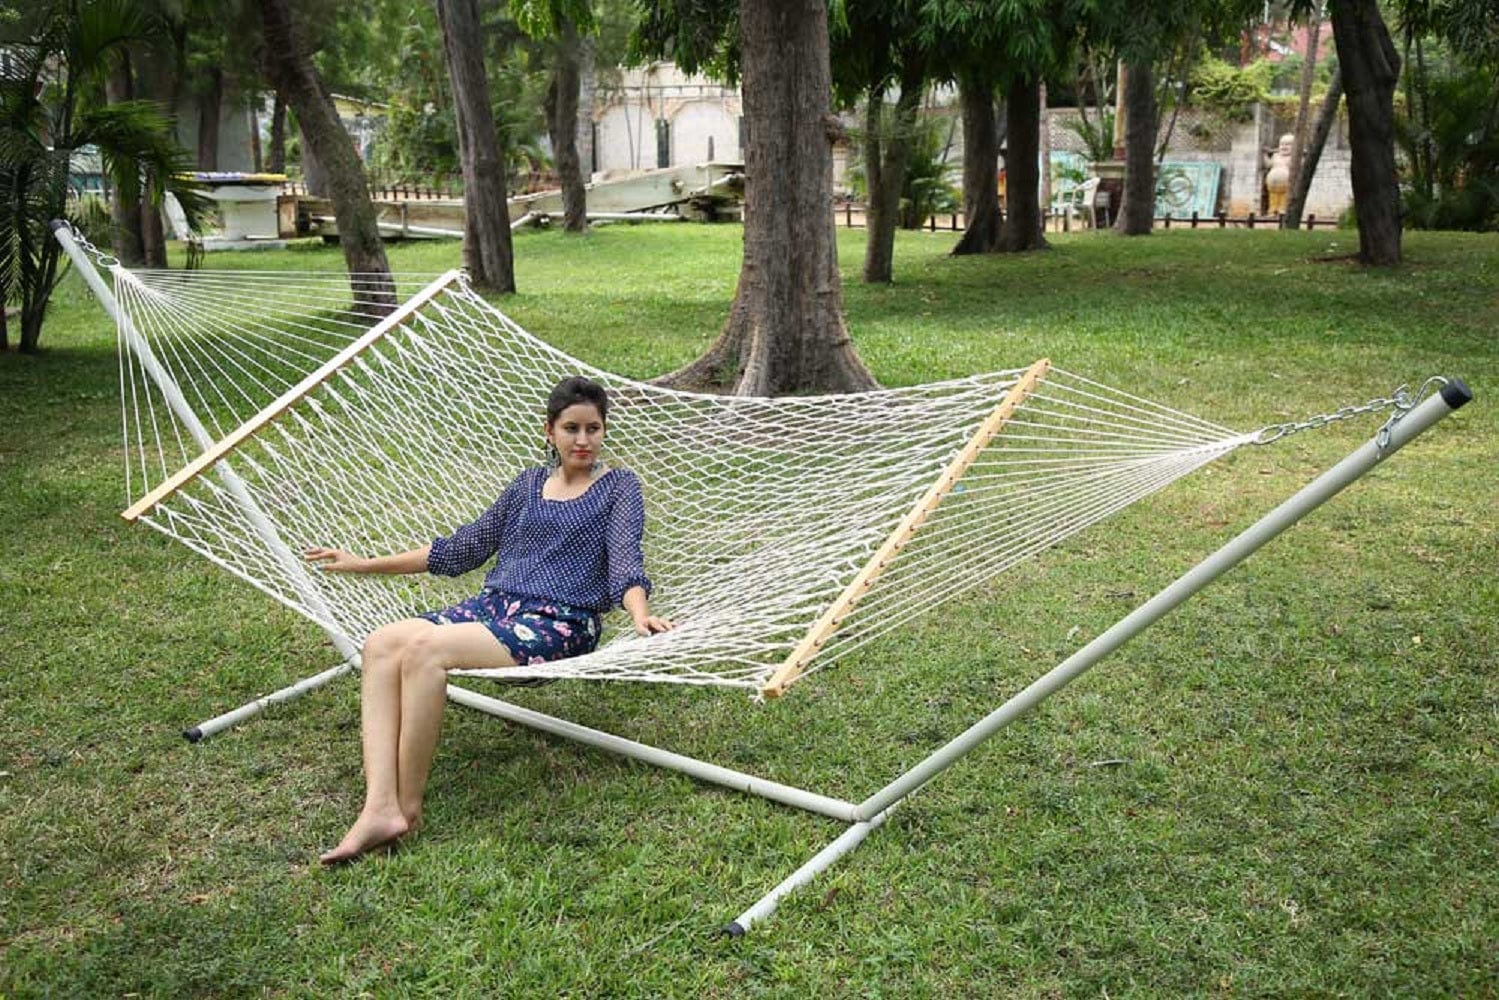 Double XL Outdoor Rope Hammock With Wooden Bars, Weight Capacity of 200 kg, 150W X 396L cm